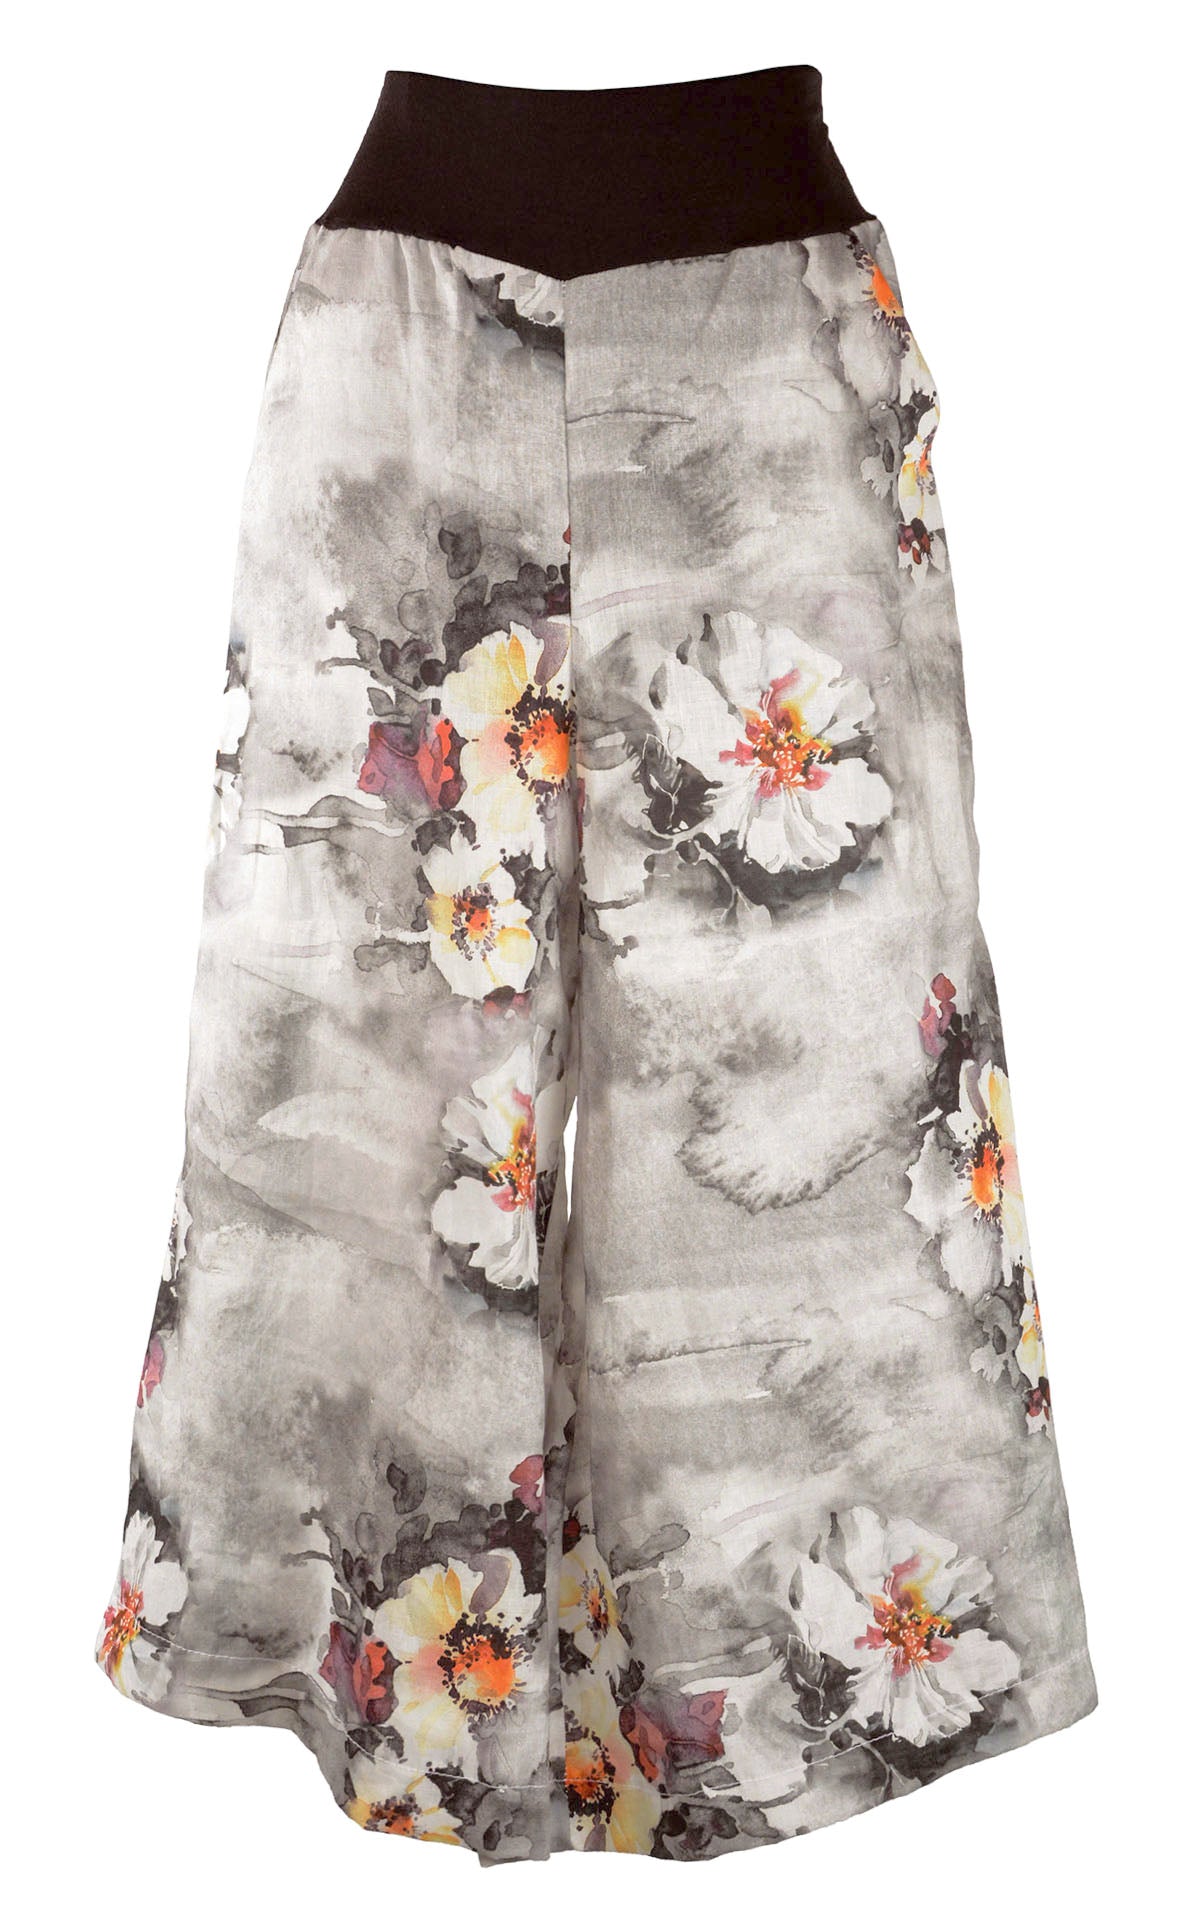 Gaucho Pants in Linen Multi-Floral. Handmade by the Leigh Young Collection. Seattle Washington.